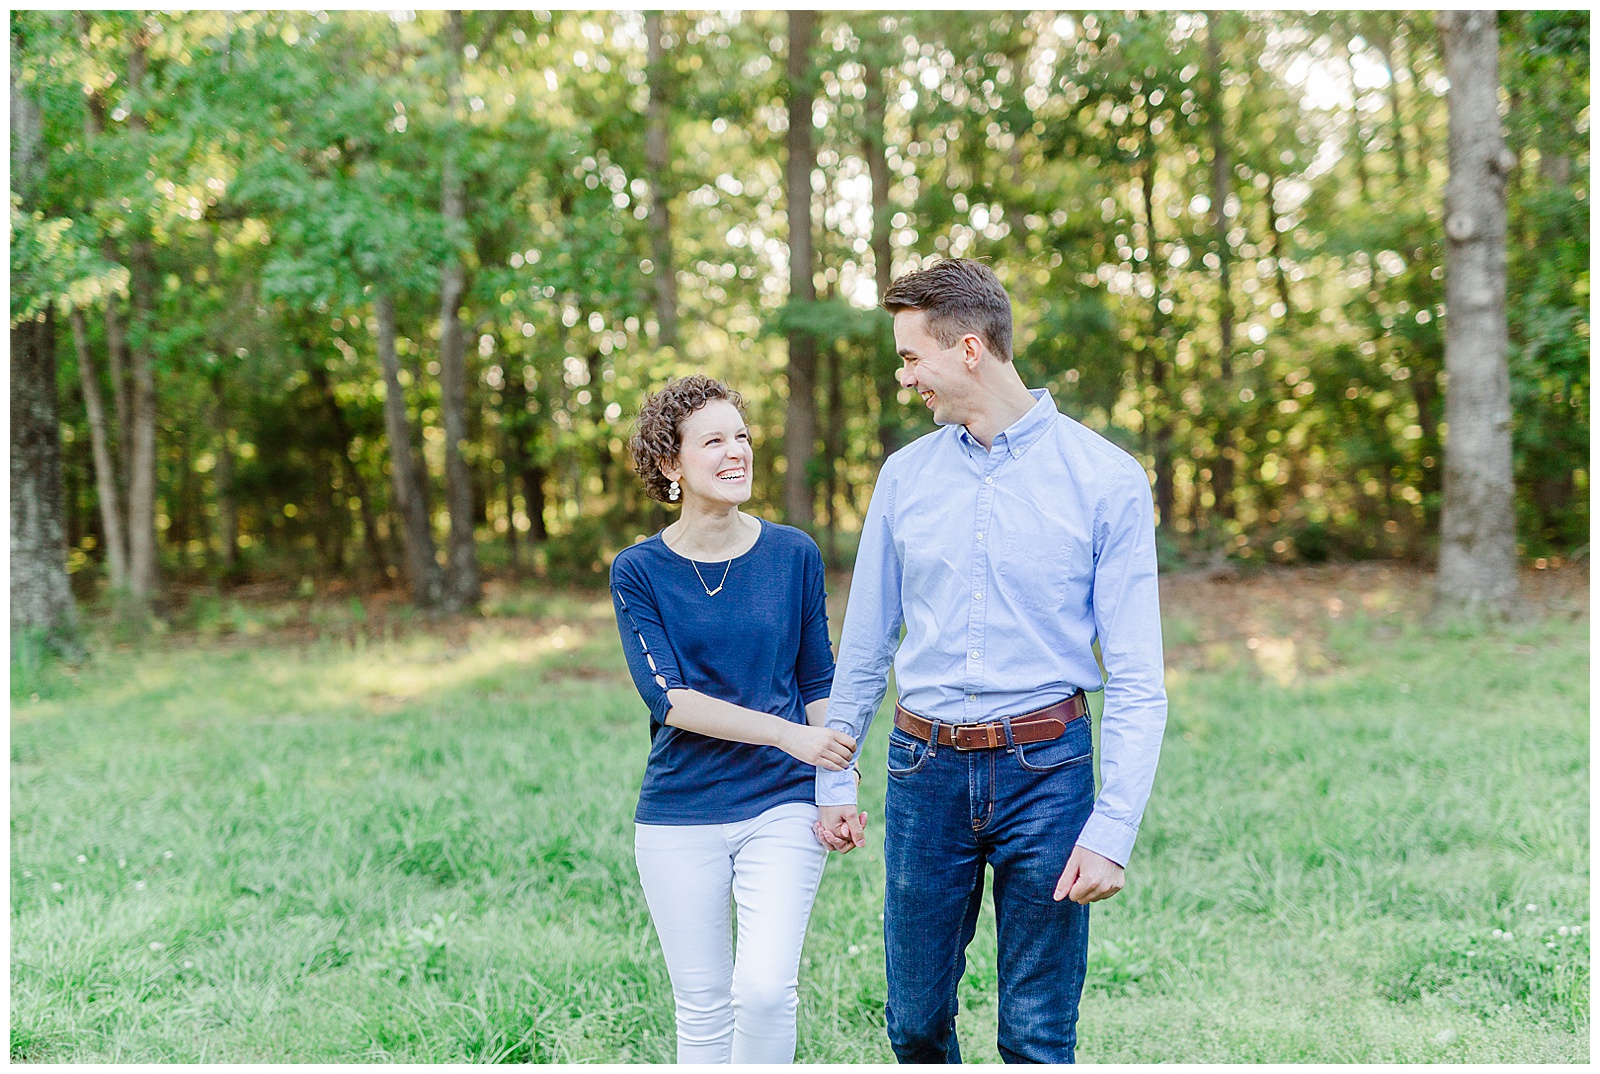 Golden Hour Outdoor Engagement Session with Classy Blue Shirt White Jeans Outfit Ideas in Charlotte, NC by Kevyn Dixon Photography